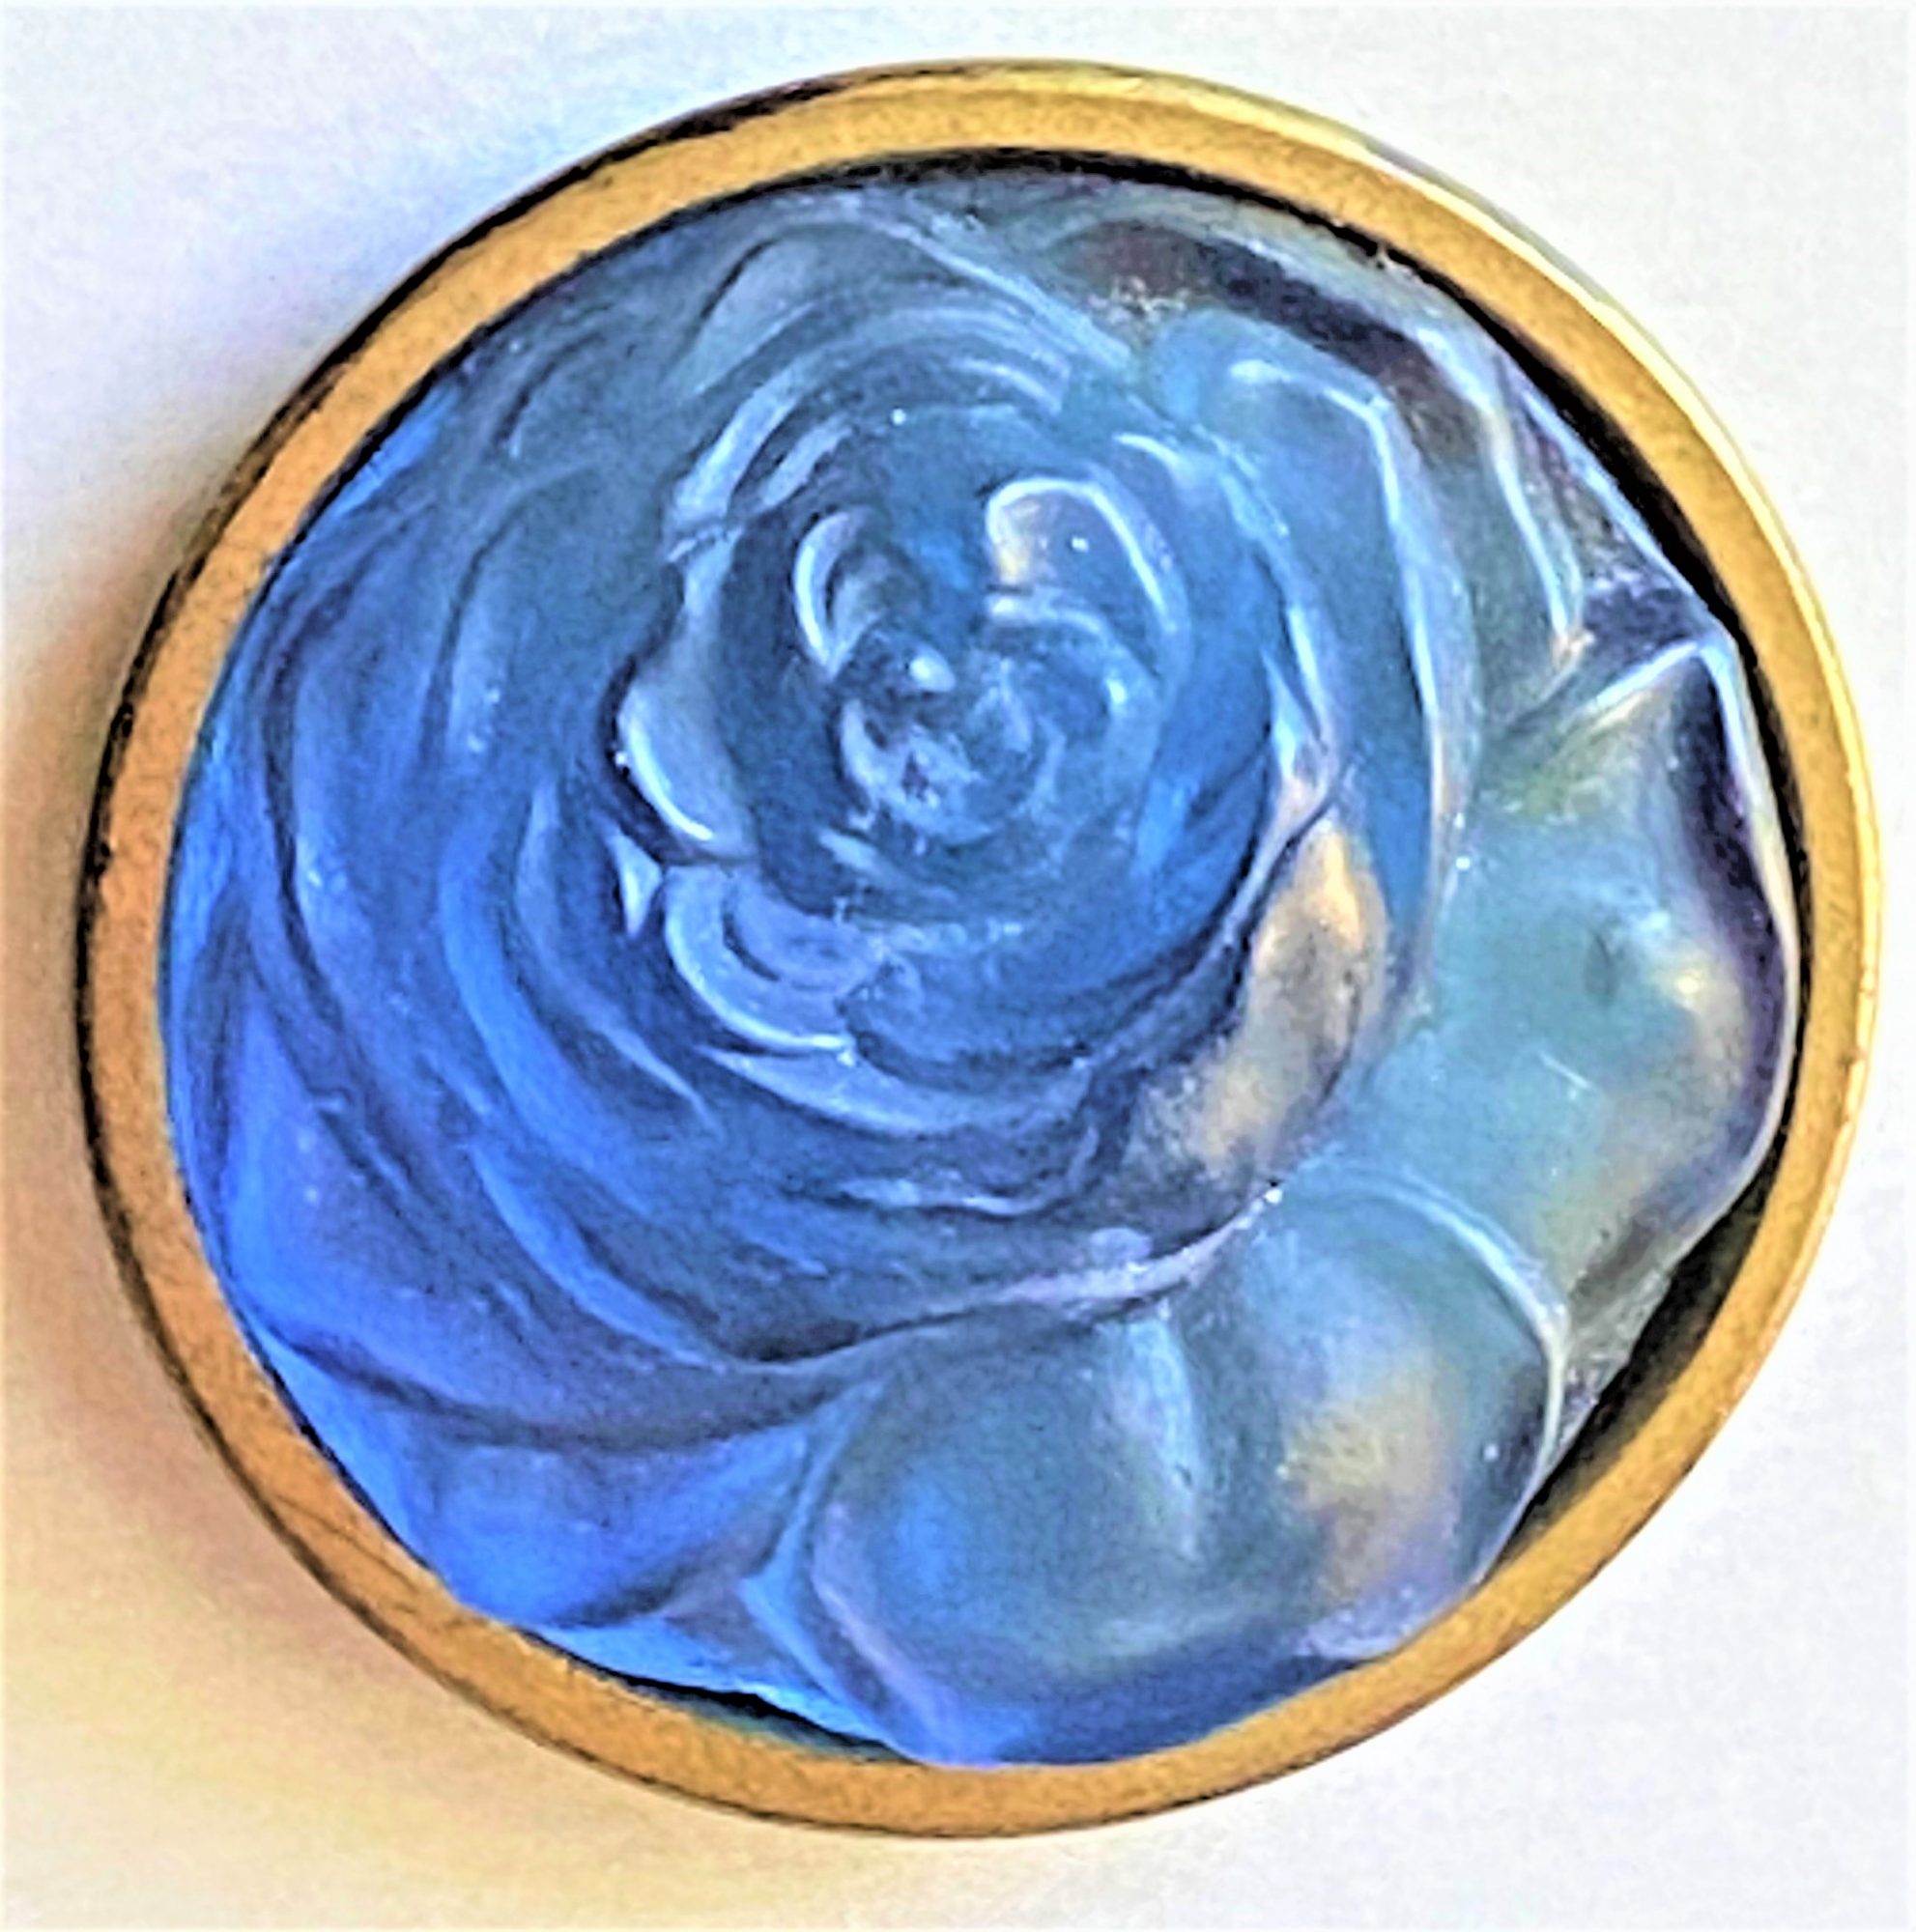 Large rare lalique glass in metal button